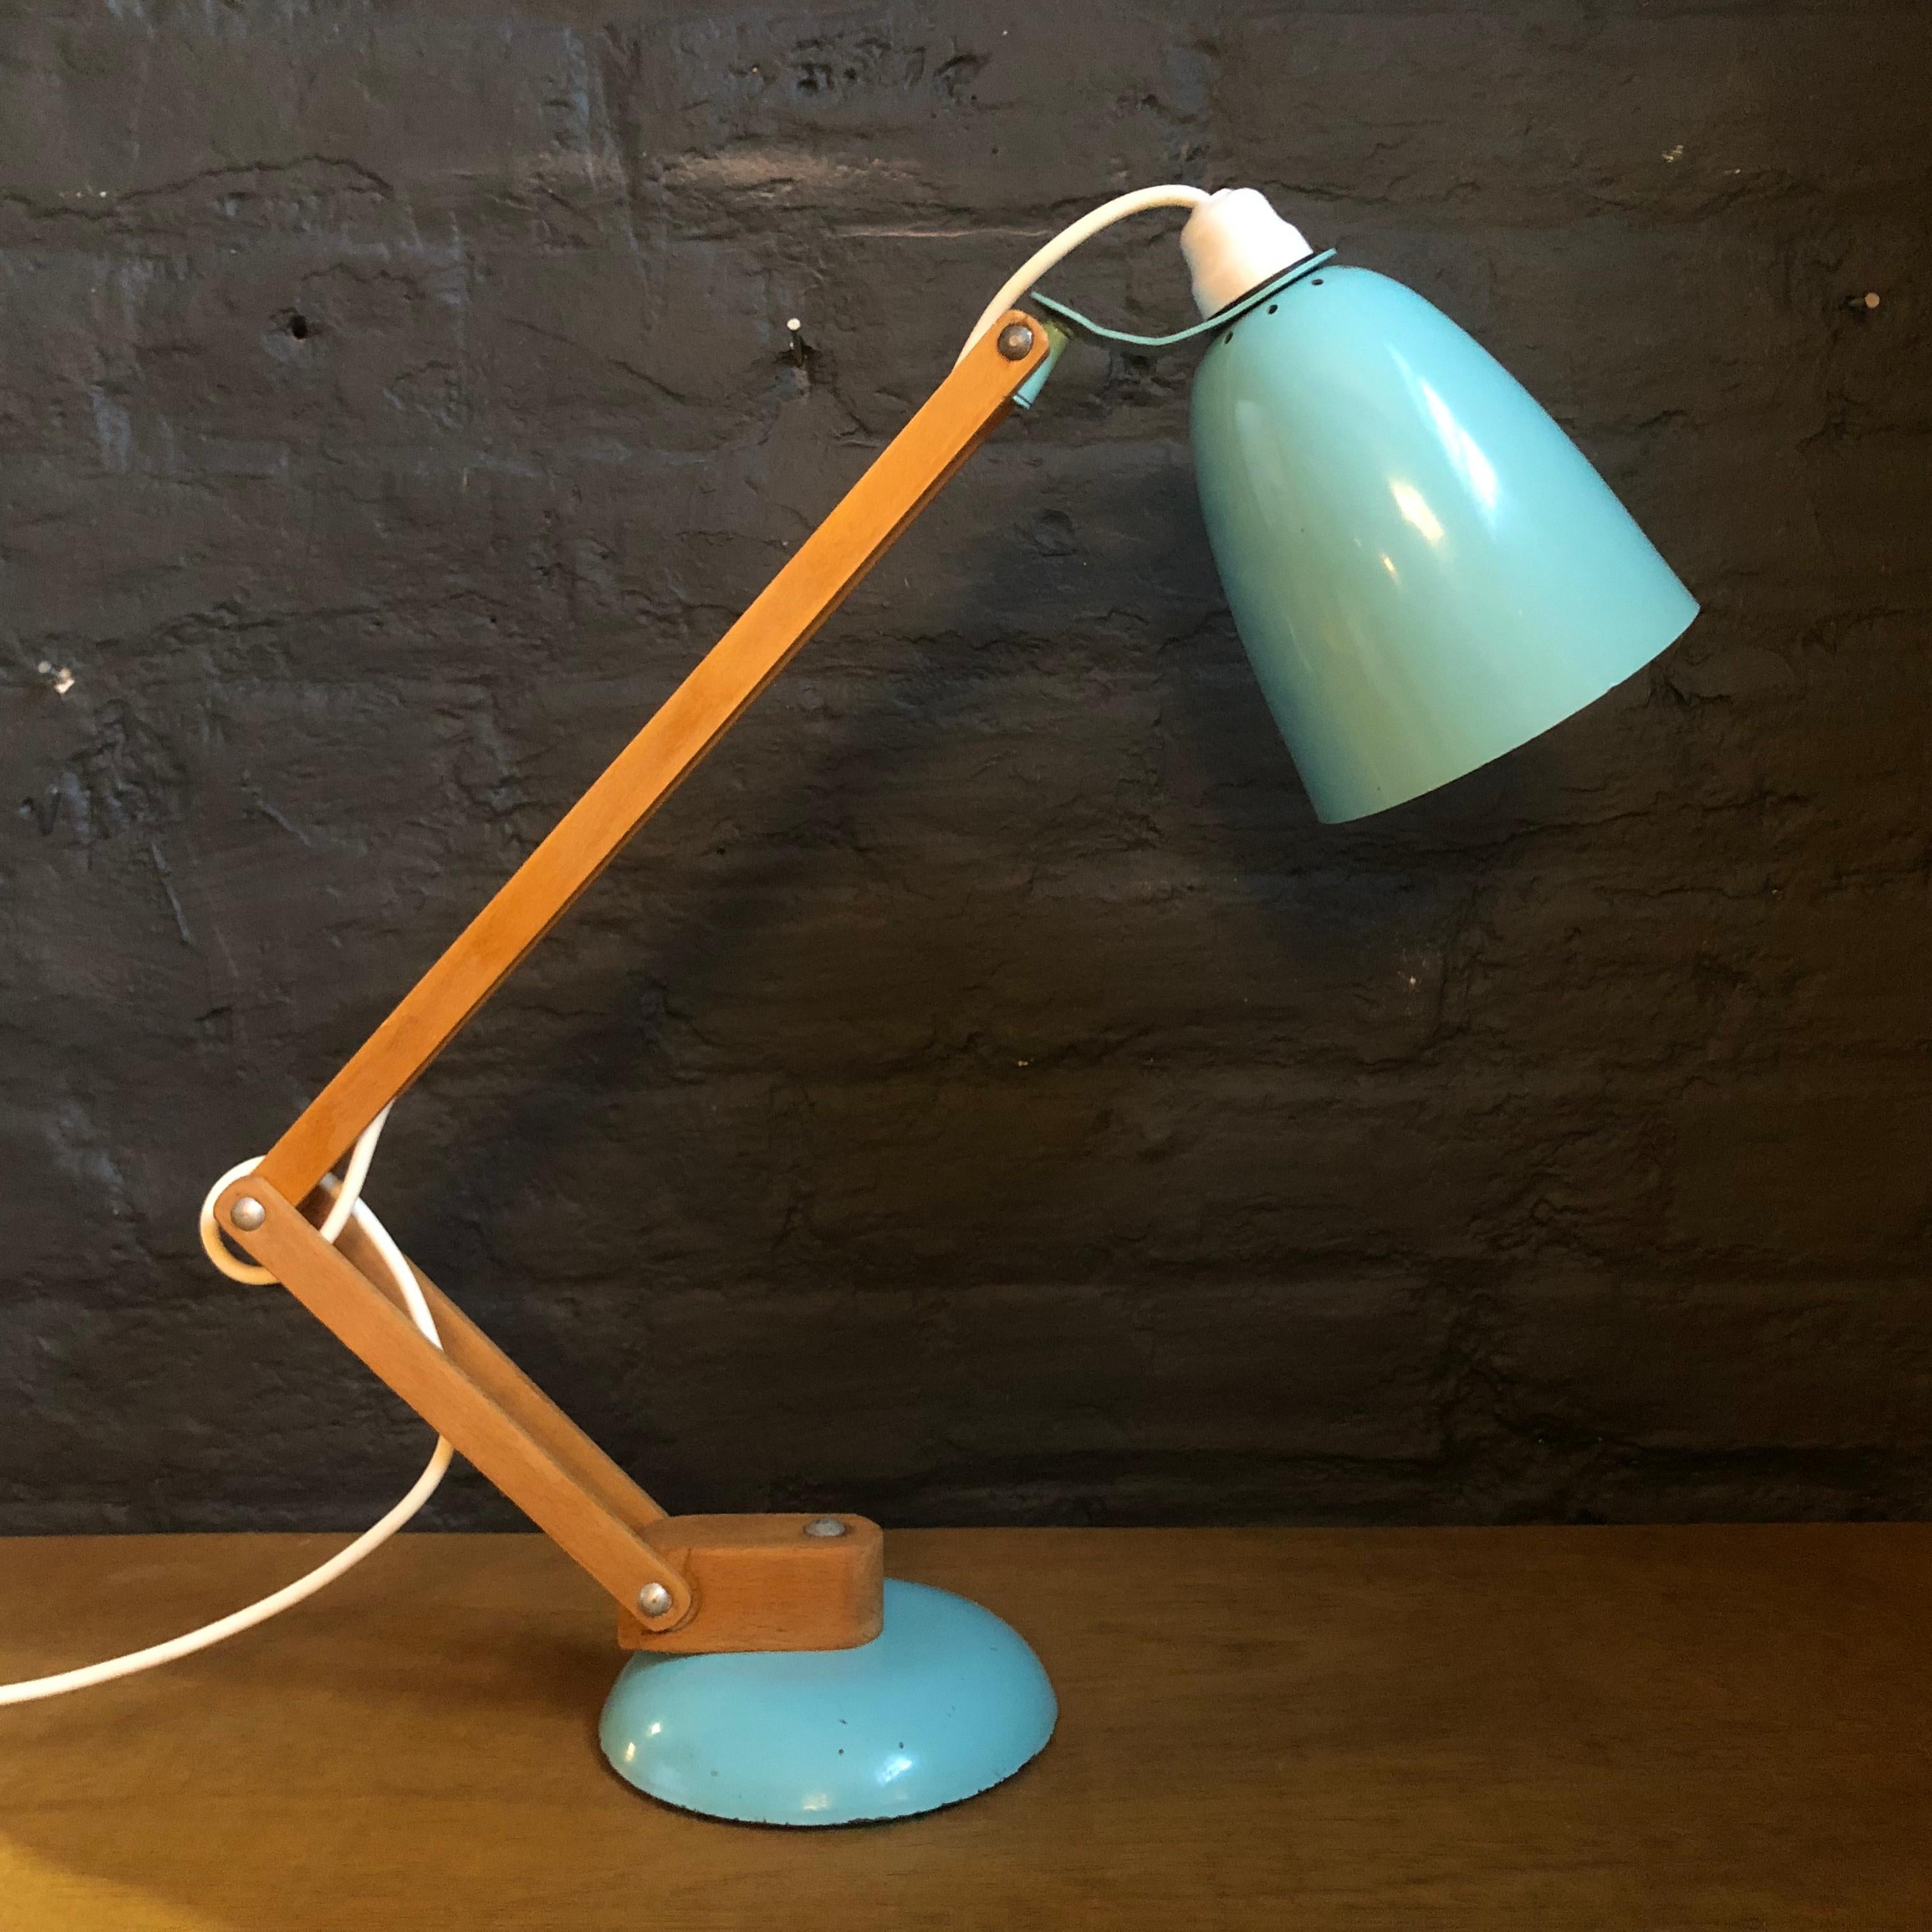 20th Century Vintage Midcentury Maclamp by Terence Conran Desk Lamp in Turquoise